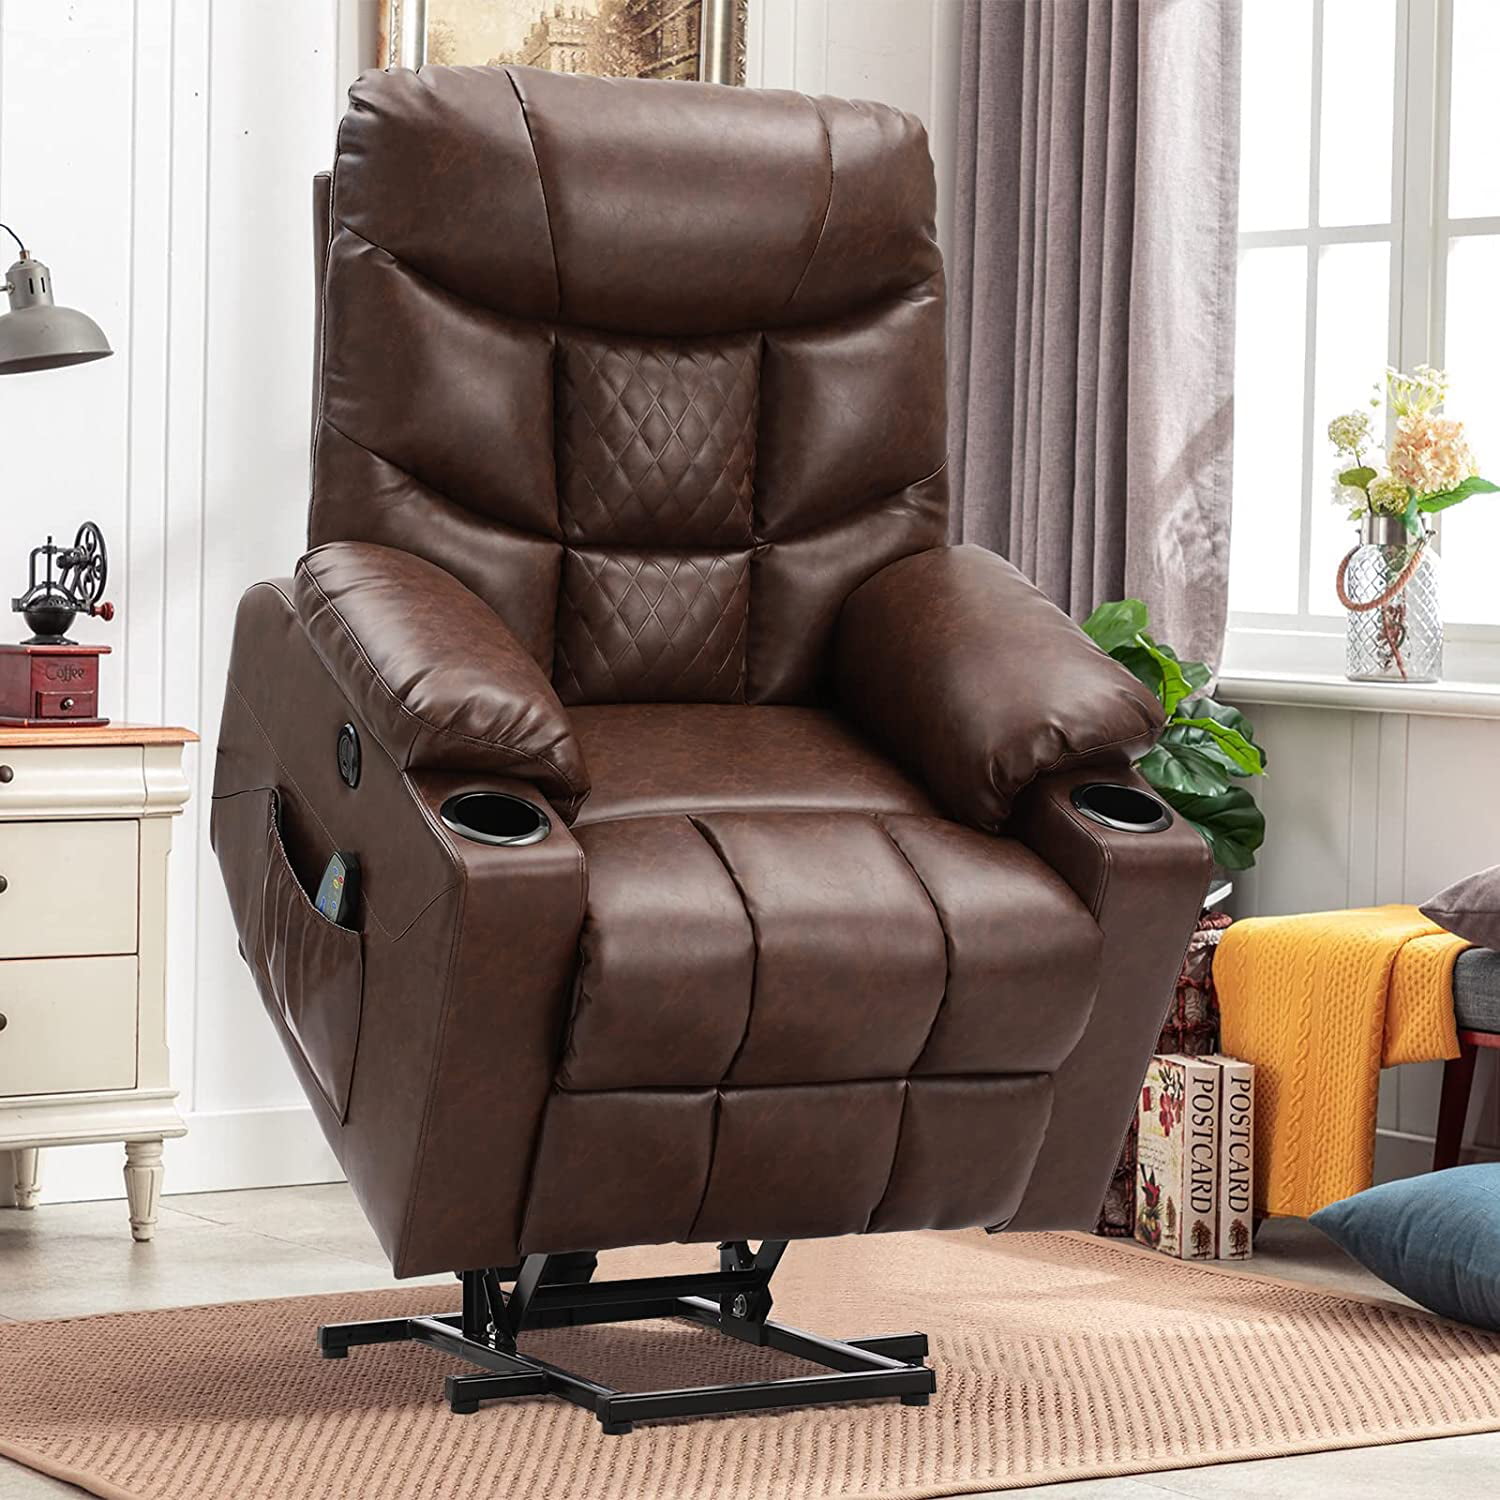 IPKIG Power Lift Recliner Chairs for Elderly with Massage & Heating ...